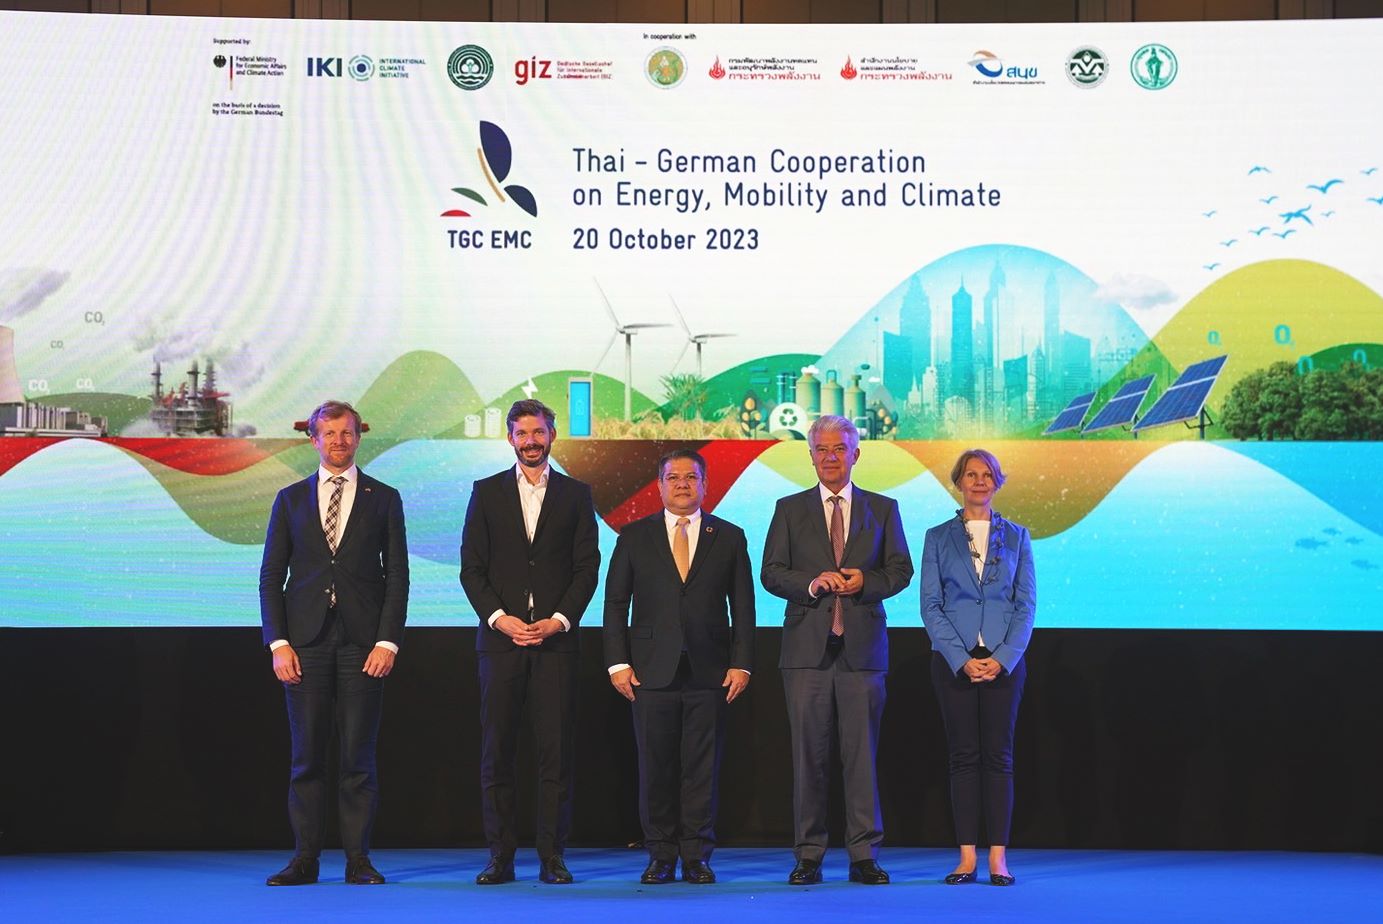 (From left to right) Mr Reinhold Elges Country Director of GIZ Thailand; Dr Philipp Behrens, Head of Division, International Climate Initiative (IKI), Federal Ministry for Economic Affairs and Climate Action (BMWK); Mr Pavich Kesavawong, Deputy Director-General, Department of Climate Change and Environment (DCCE); Dr Ernst Reichel, Ambassador of Germany to Thailand; Dr Dominika Kalinowska, TGC EMC Project Director, GIZ